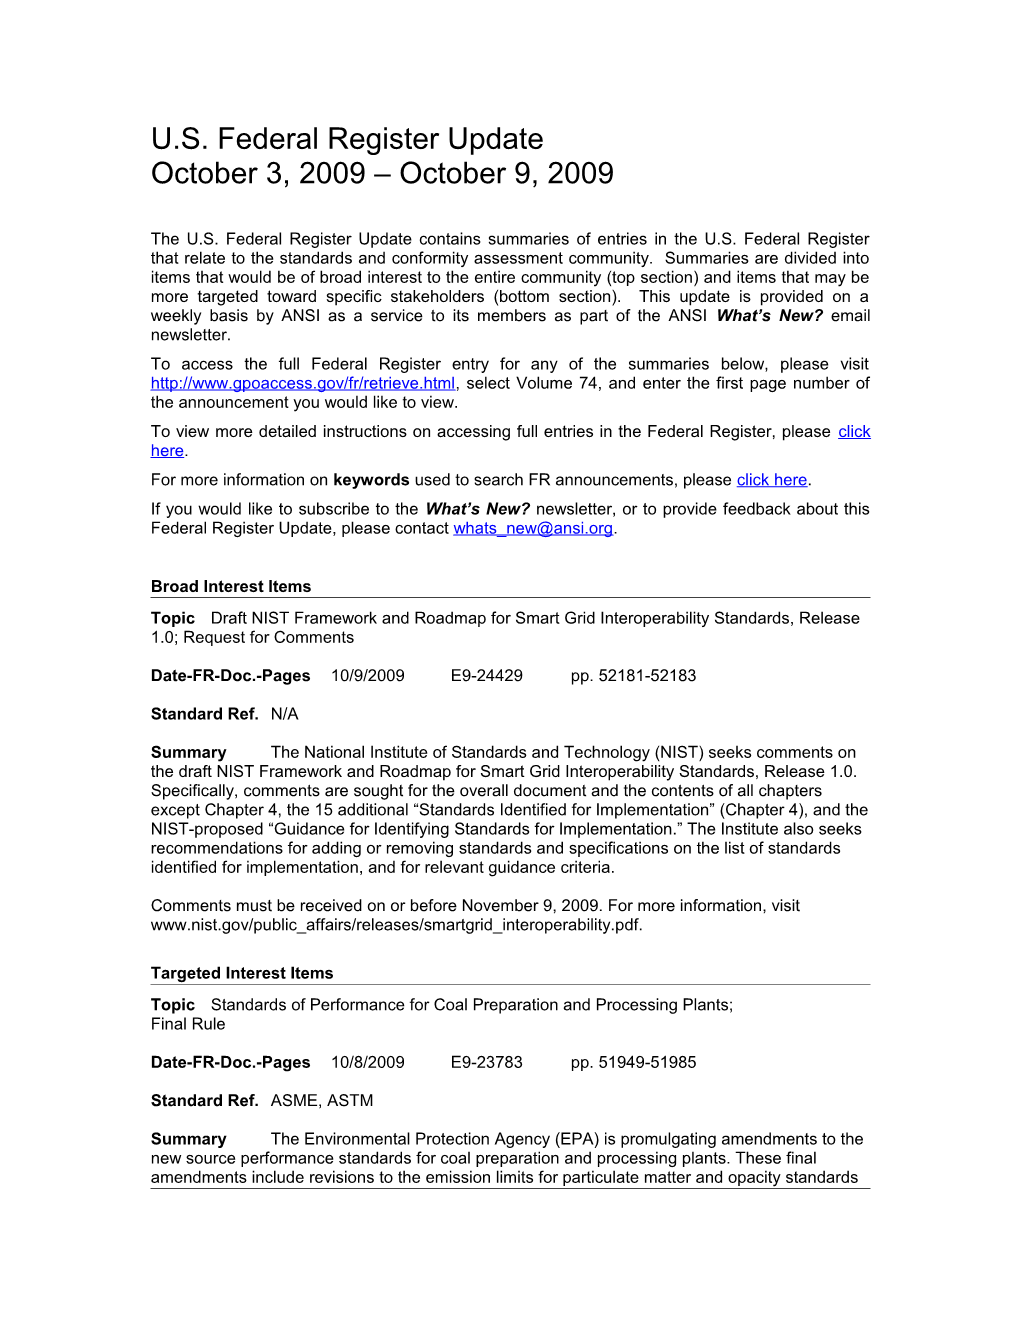 Standards and Trade Related Notices from the U.S. Federal Register, 10.09.09